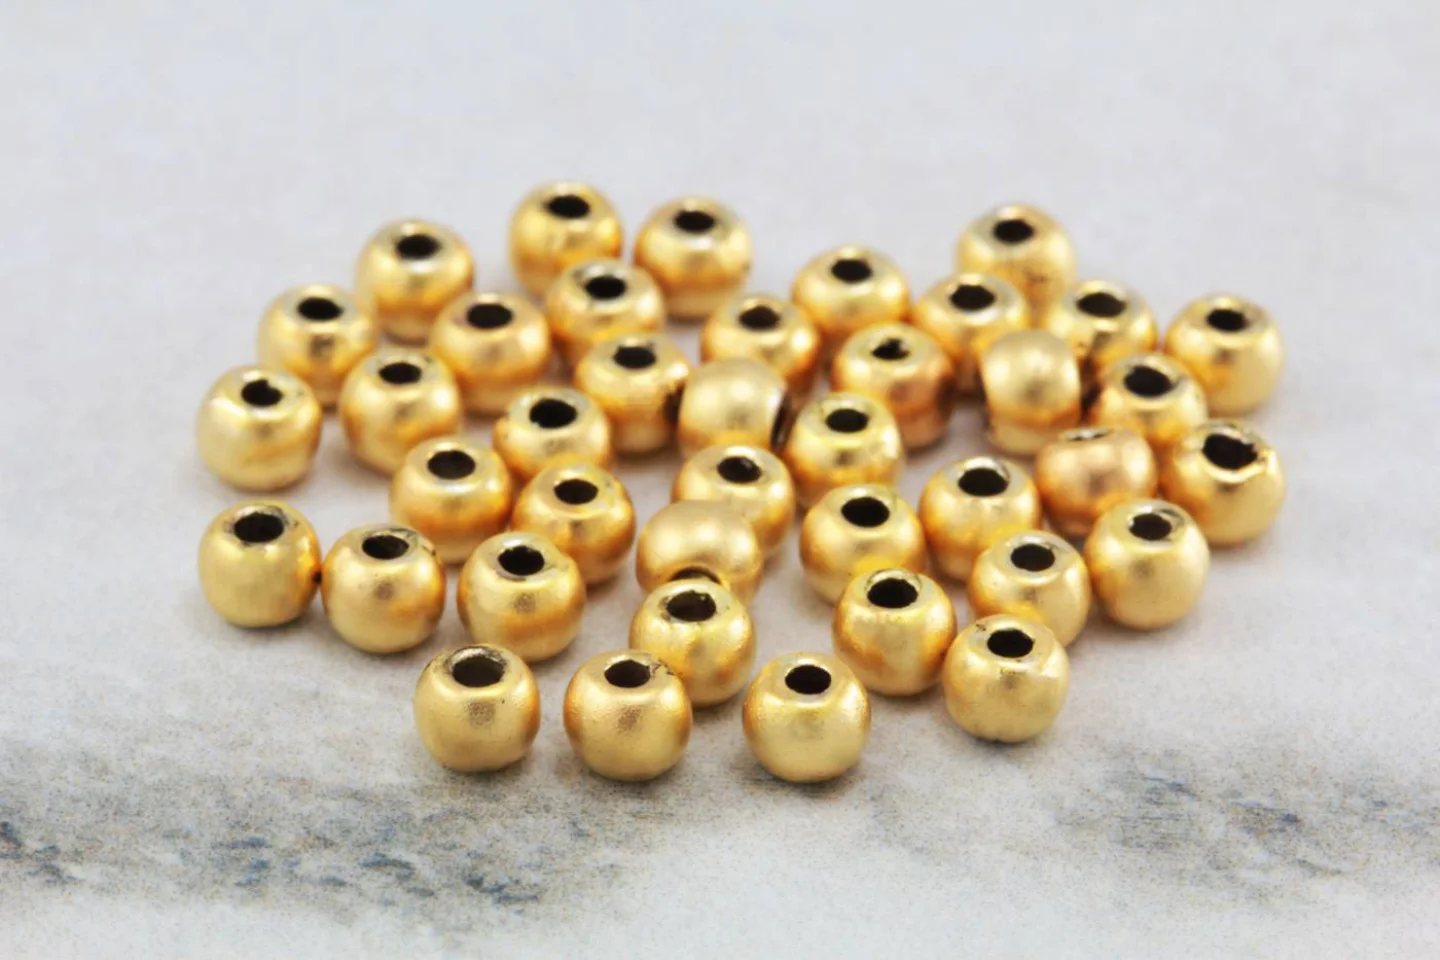 4mm-mini-gold-round-ball-spacer-beads.